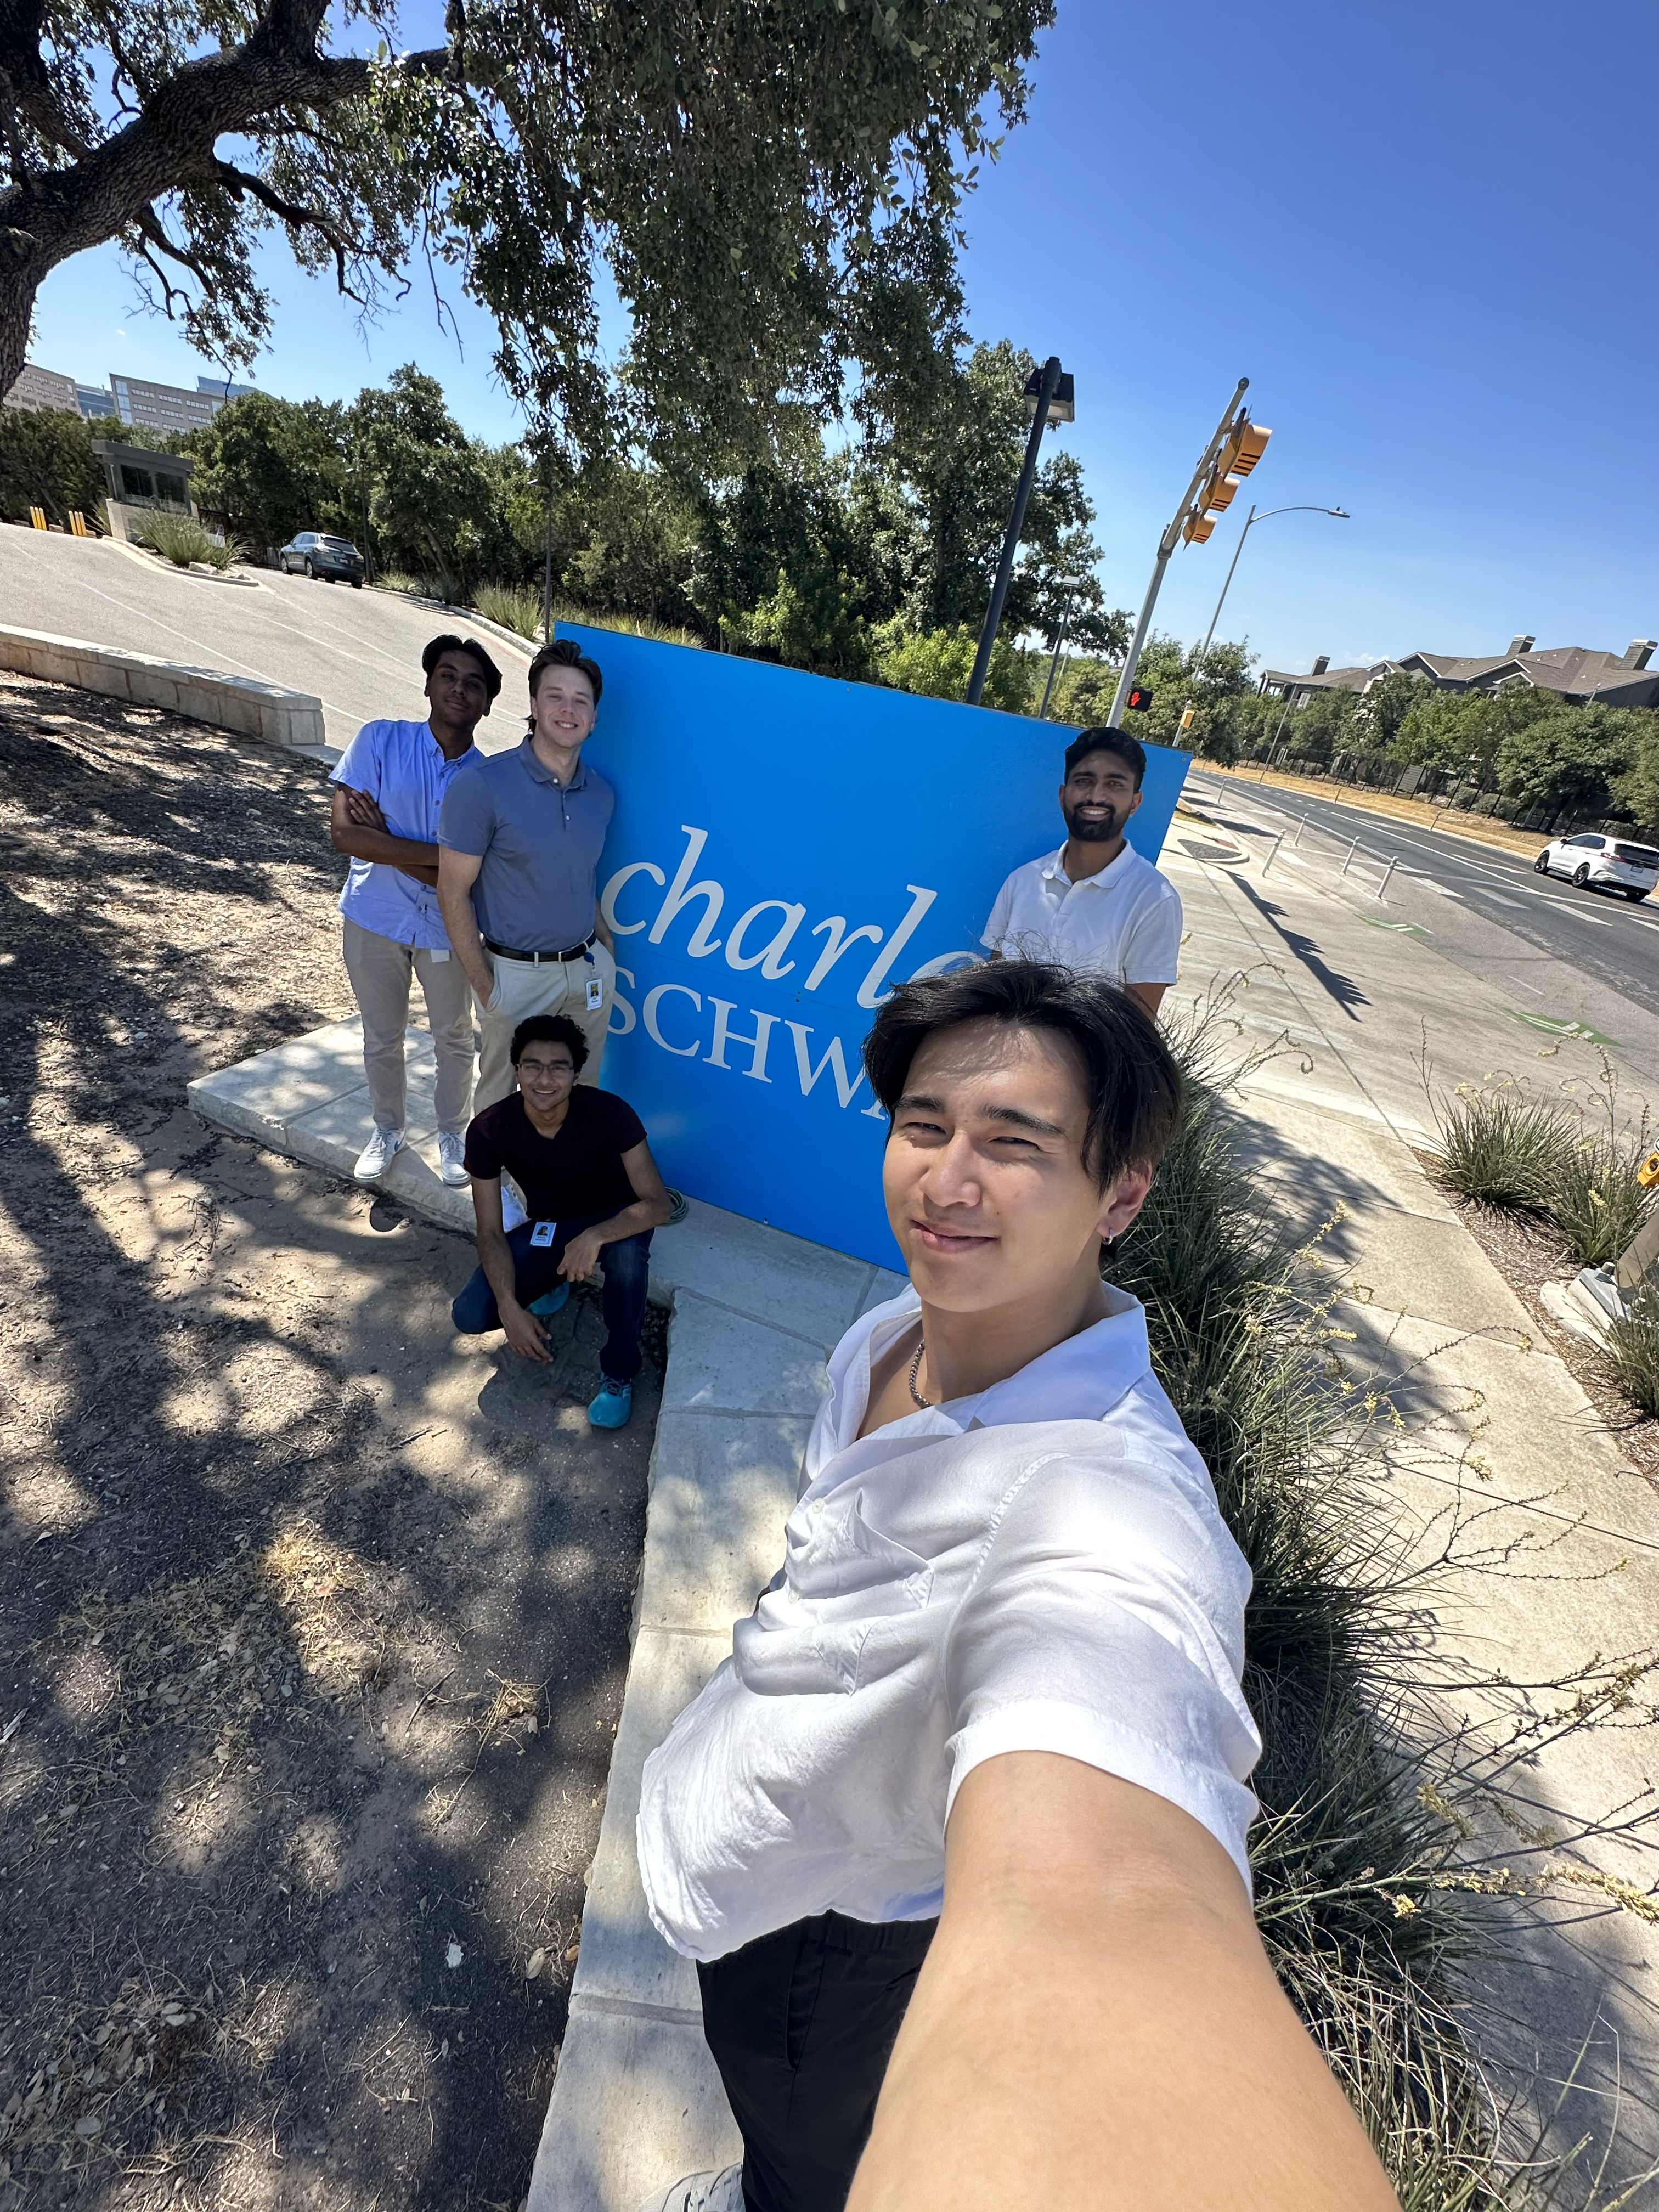 Jack and his fellow interns in front of the Charles Schwab Office sign